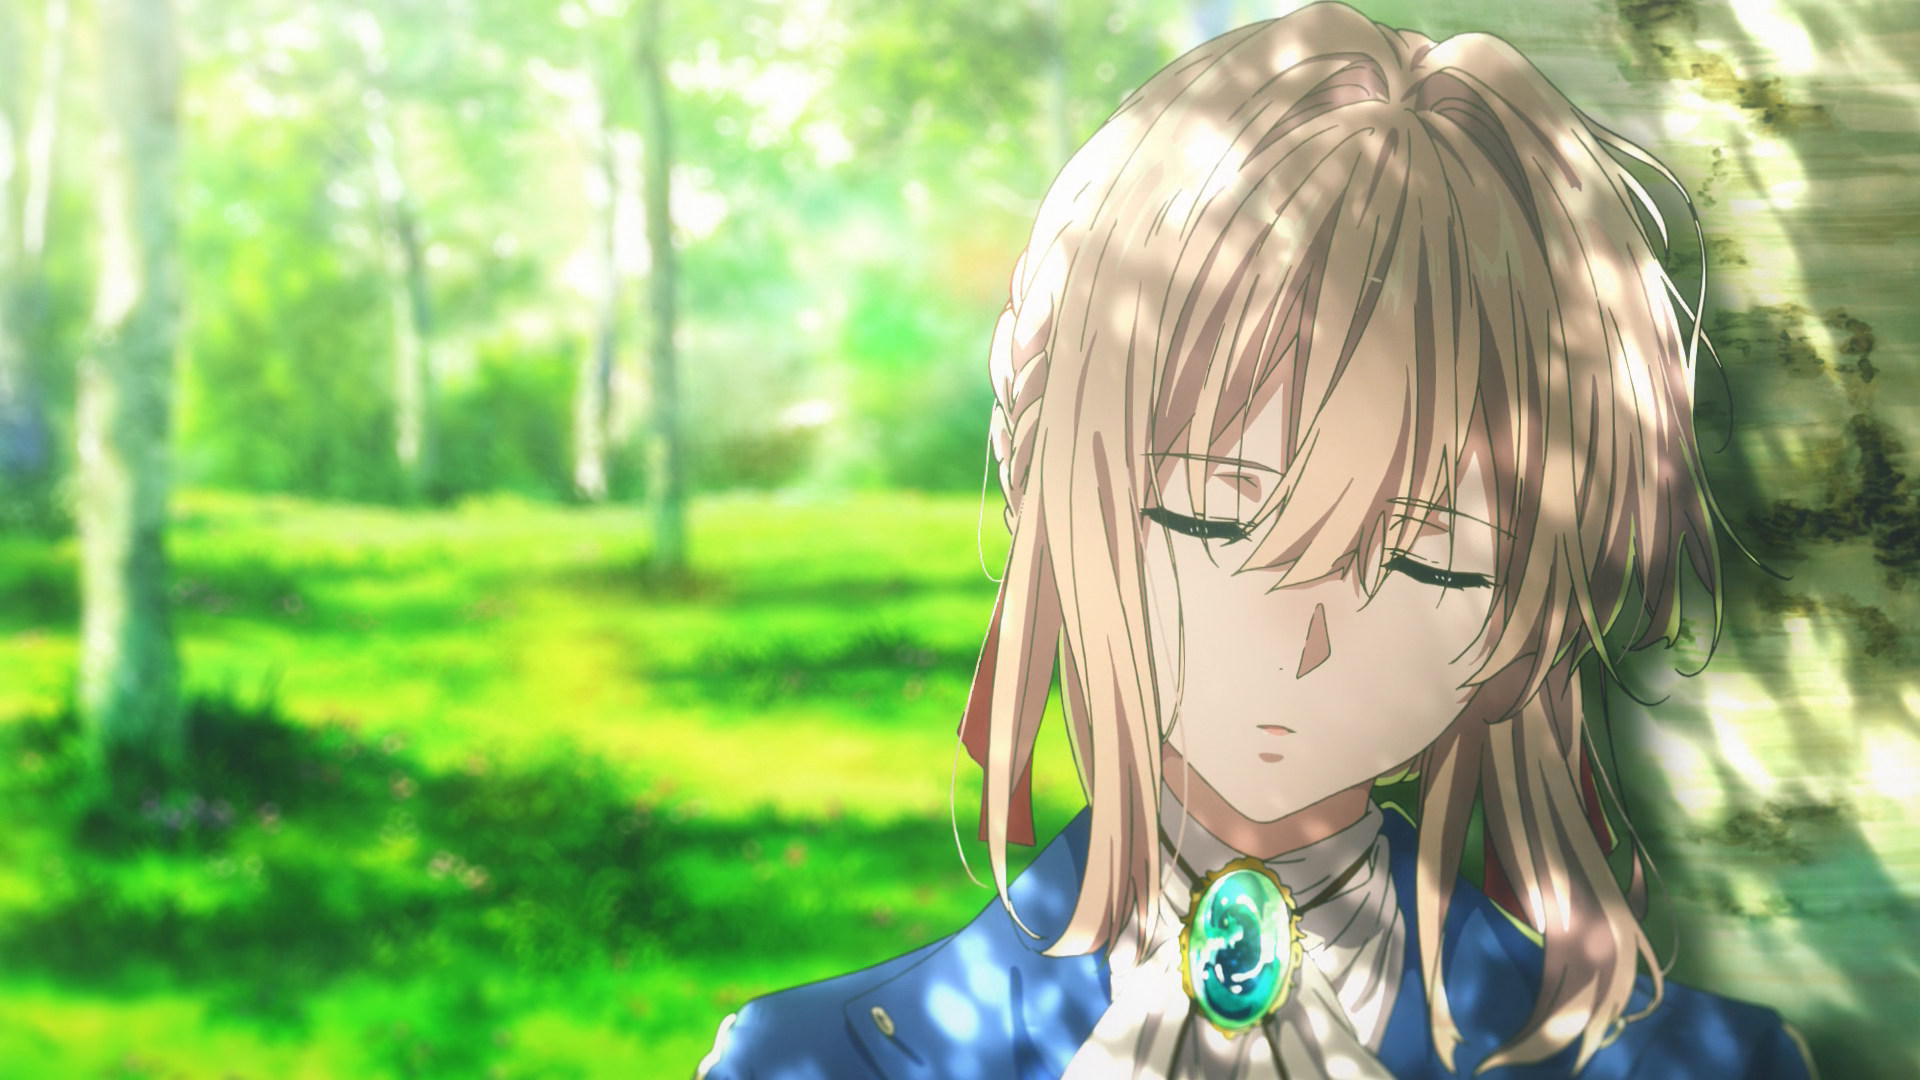 Anime 1920x1080 Violet Evergarden (character) Violet Evergarden blonde sleeping anime girls closed eyes trees grass nature